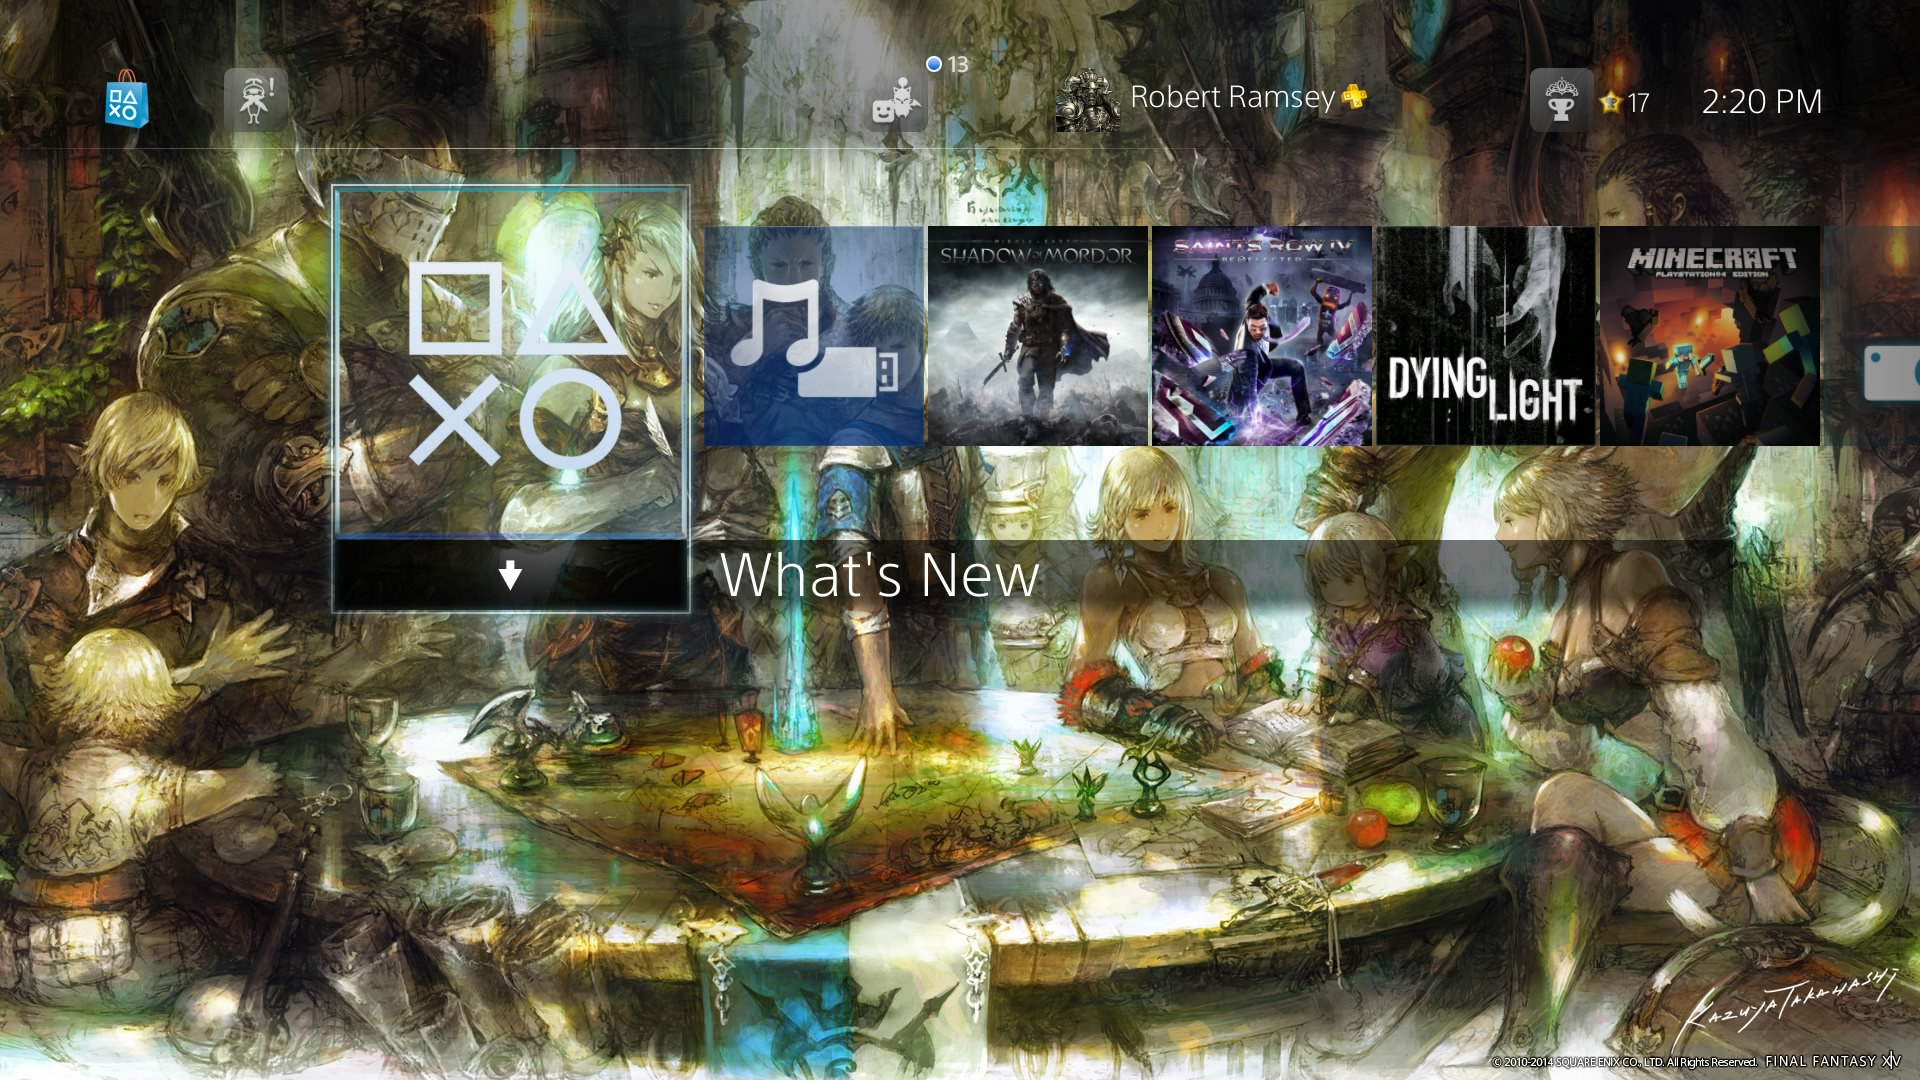 Final Fantasy Xiv S Fantastic Ps4 Theme Is Now Available And Free In Europe Push Square